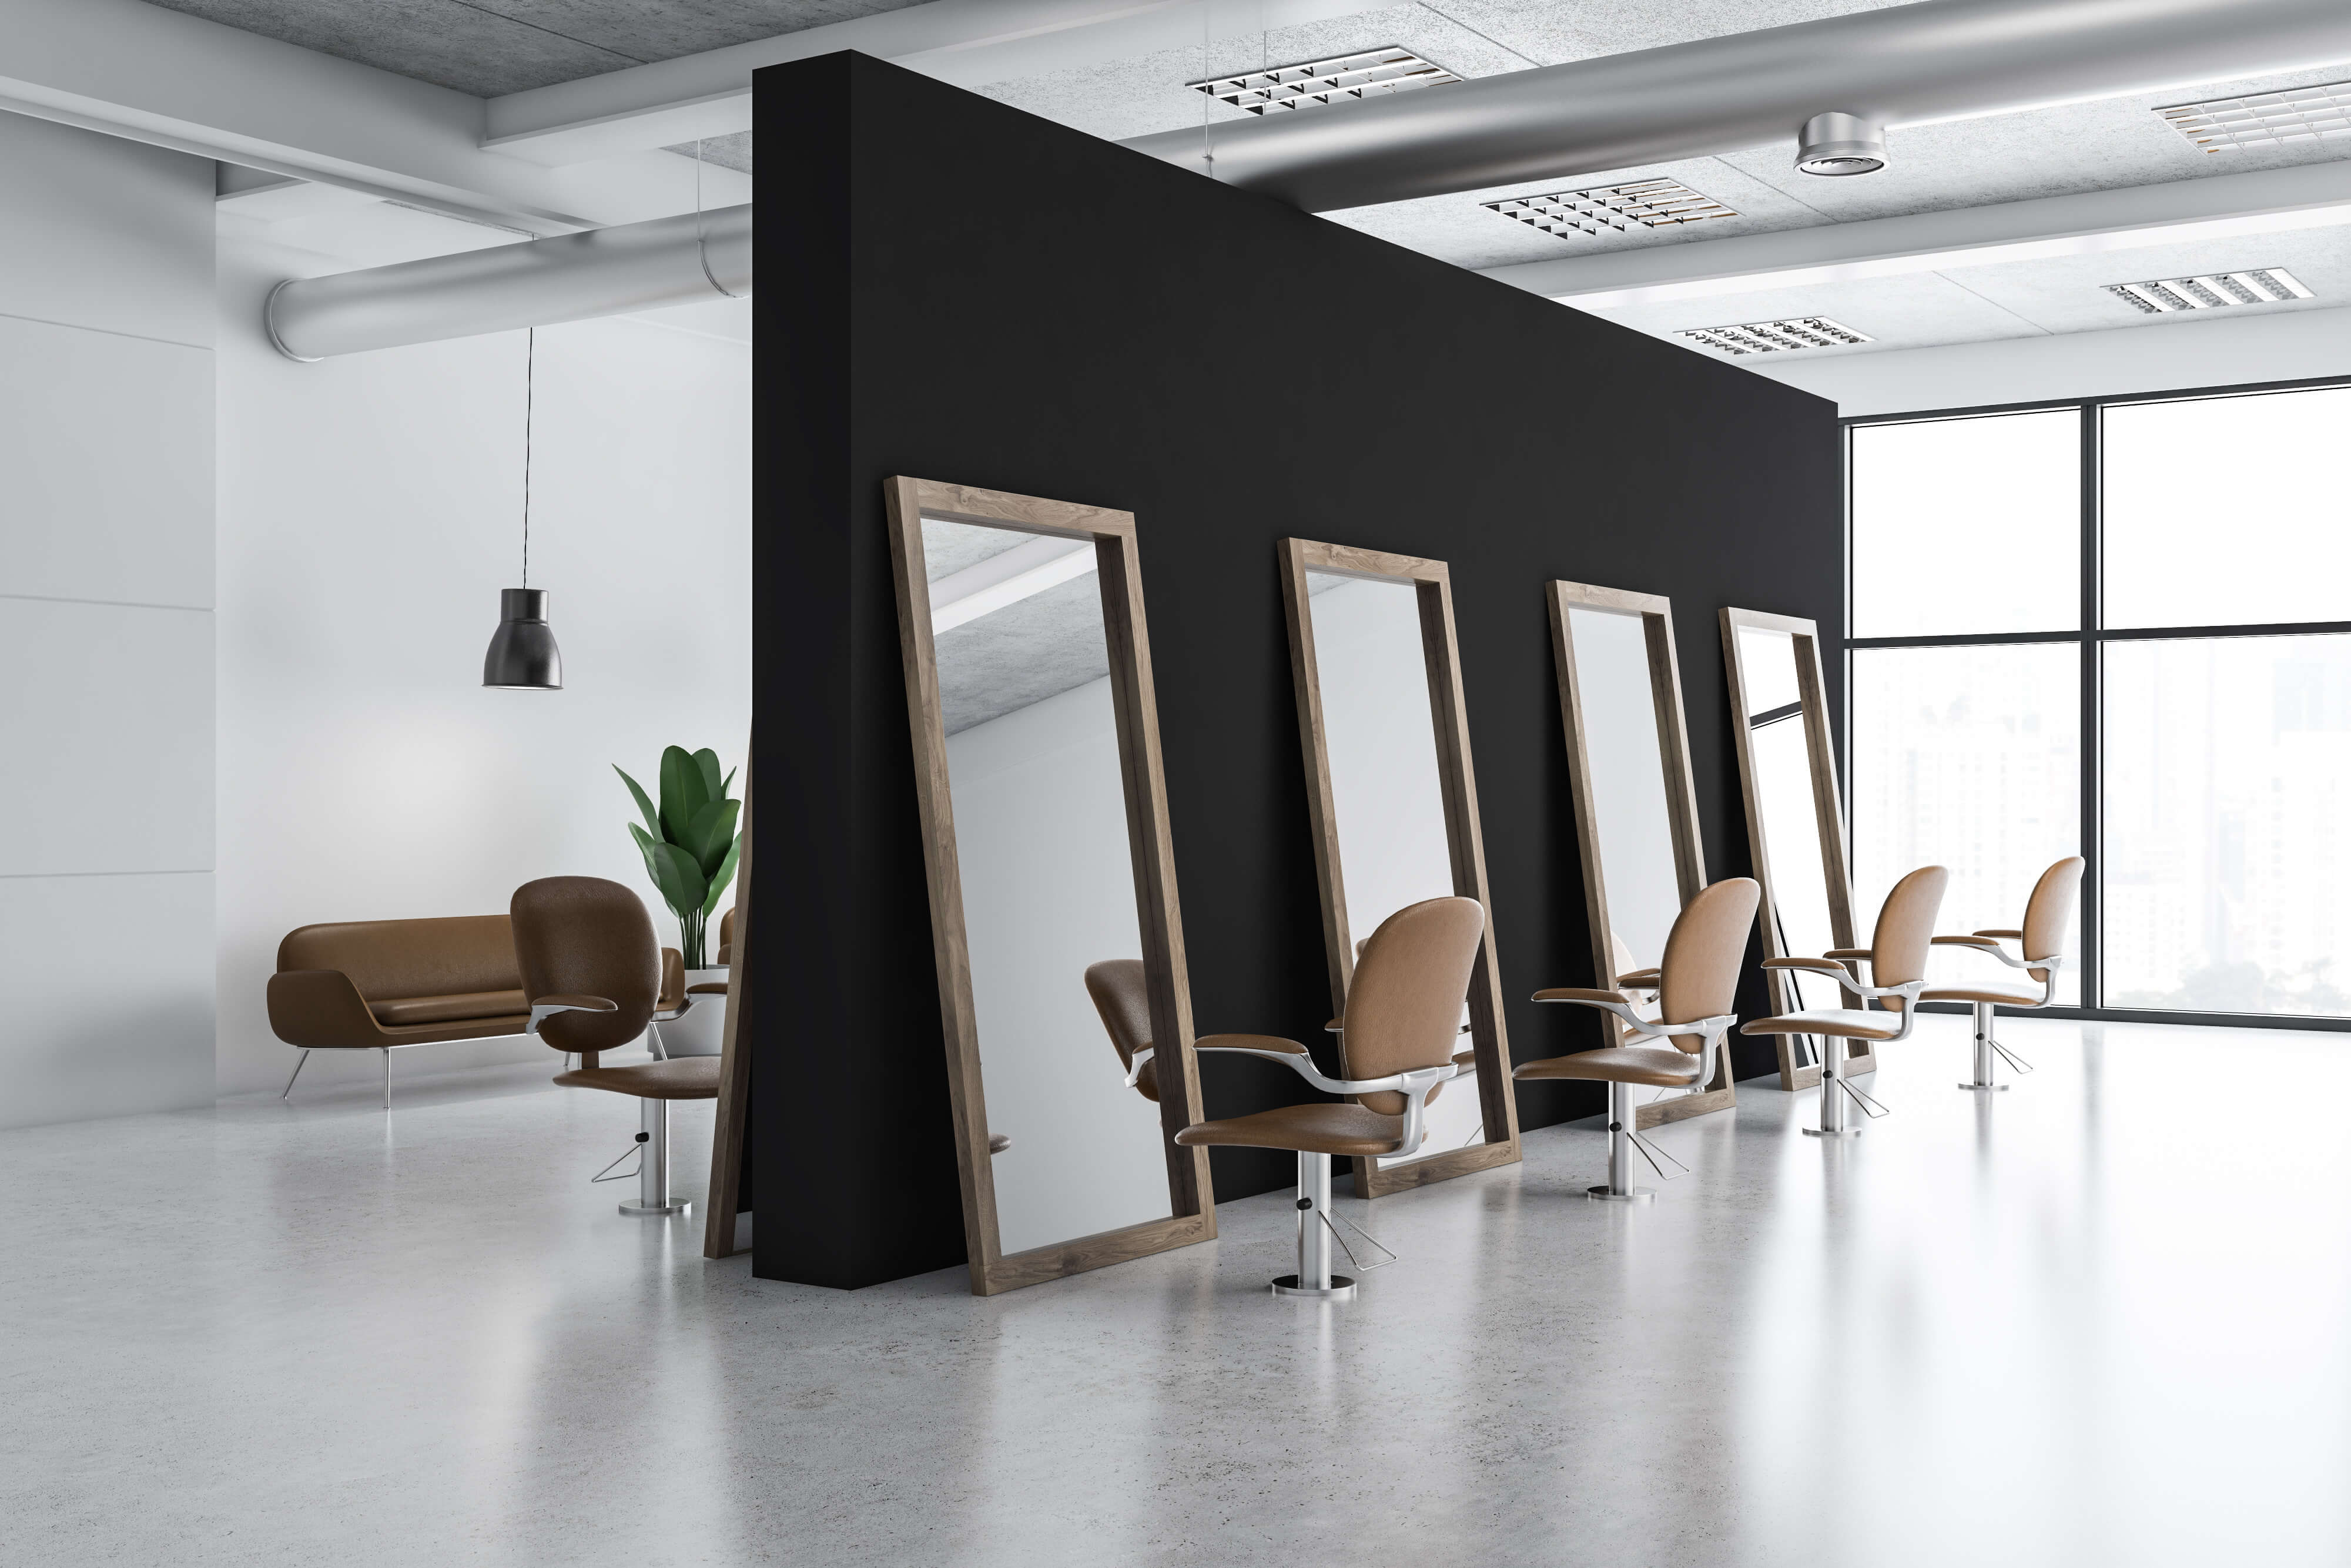 Sleek, modern salon with four brown chairs stationed at mirrors and a lounge area in the background.